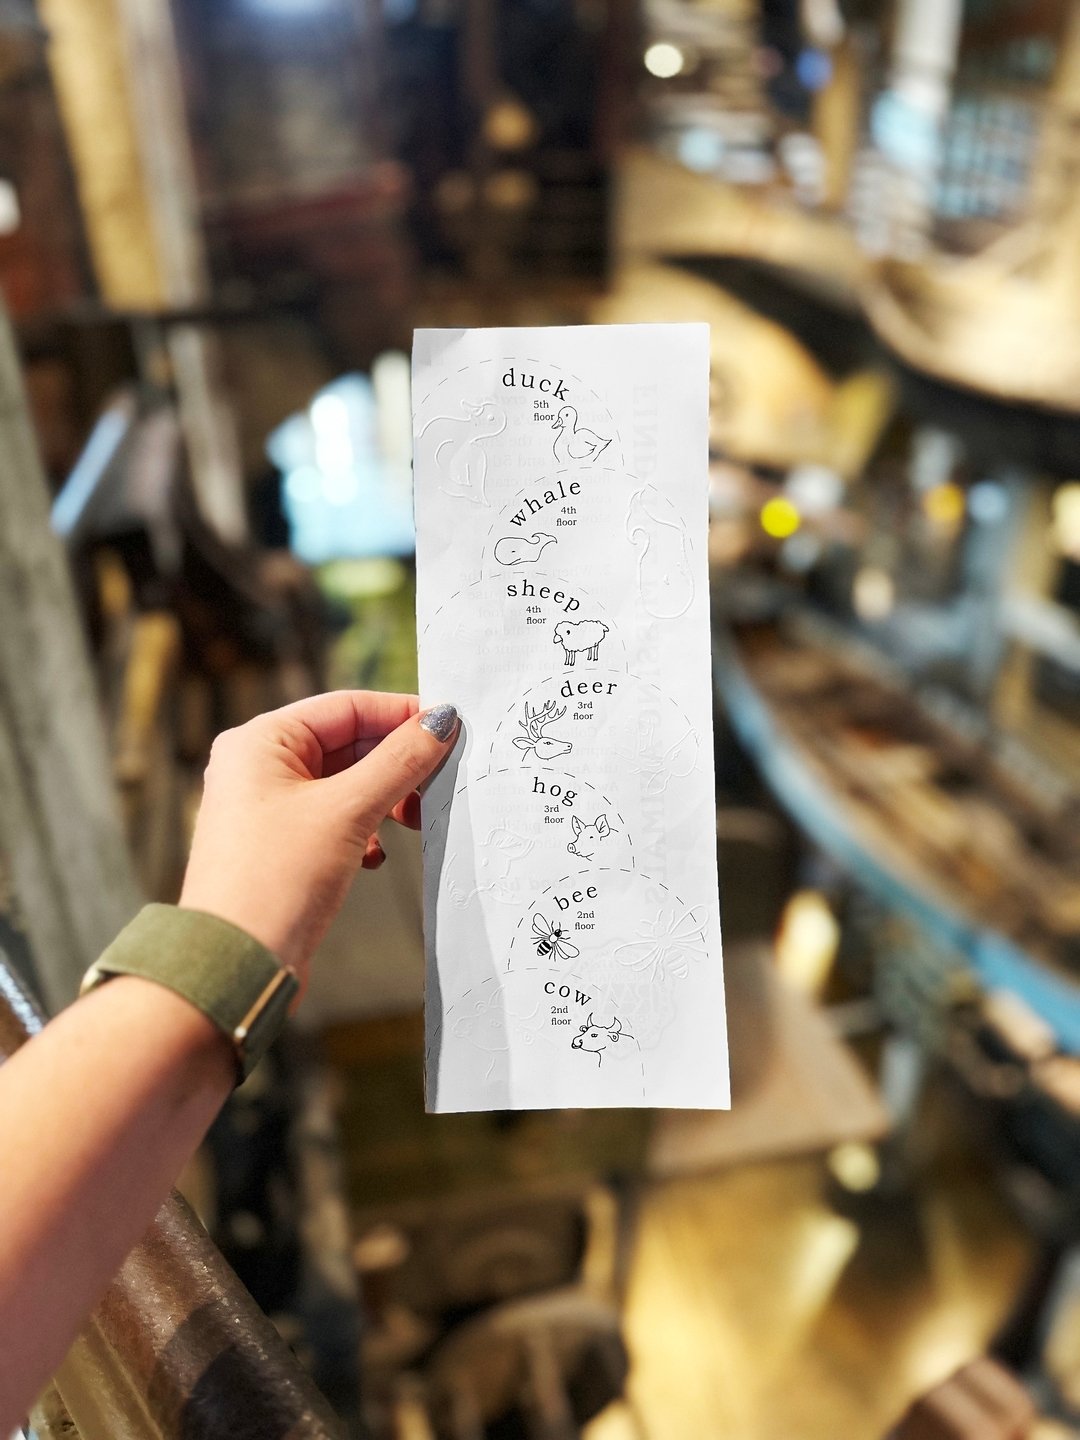 🌧️ Rainy Day Family Activity | Bucks County 🌧️

Need something fun to get the family out of the house on a rainy day?! Check out the Mercer Museum! 🏰

For little kids: 🔍 Ask for the animal scavenger hunt list at the front desk and search for anim